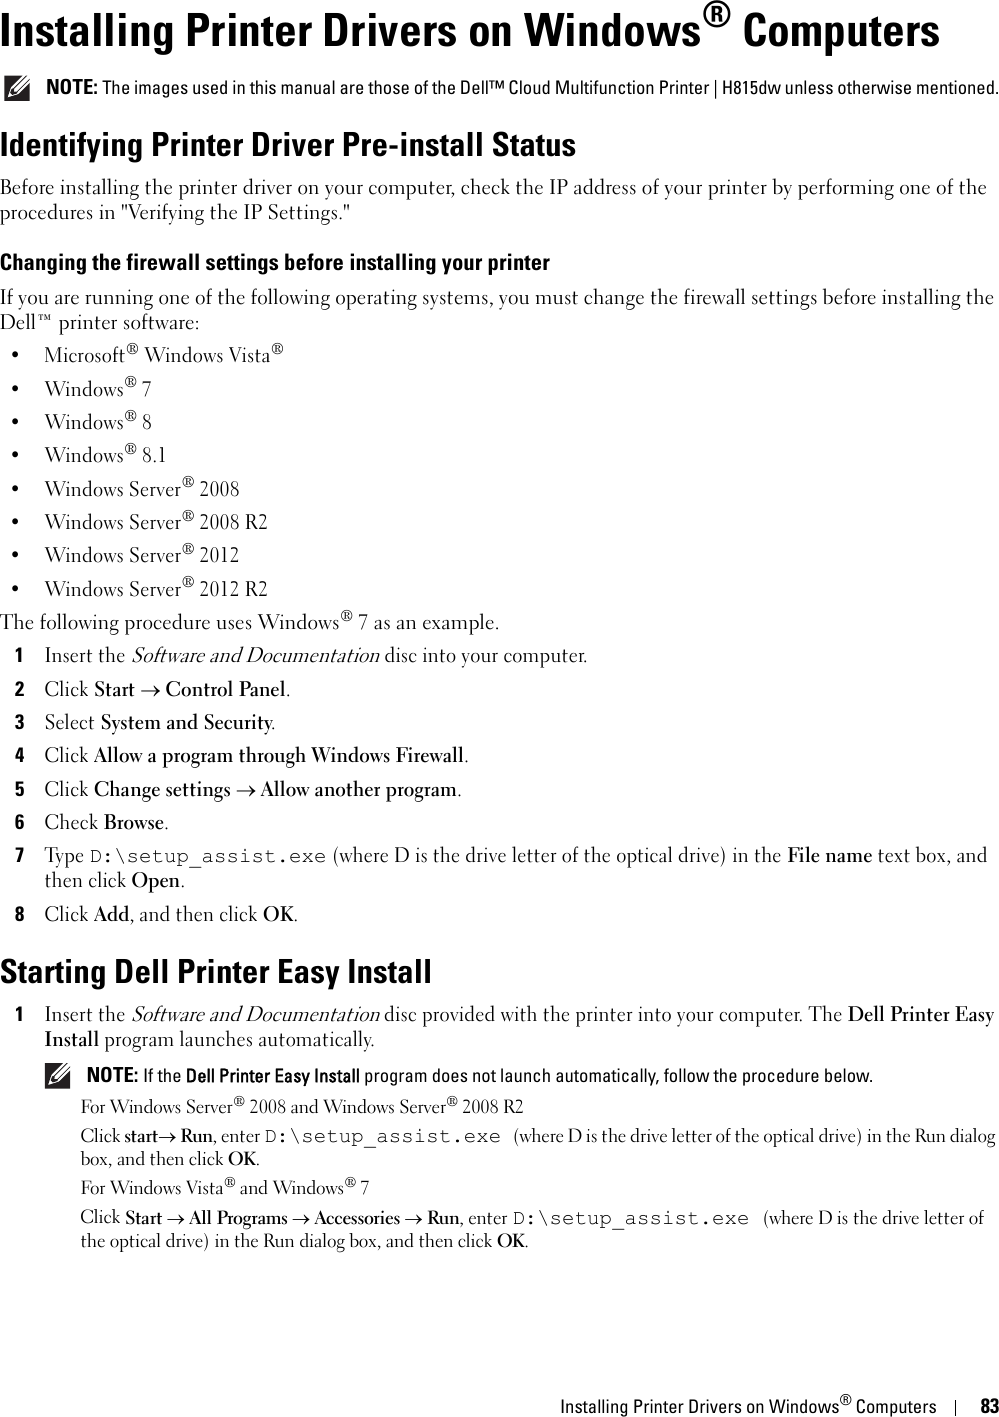 Installing Printer Drivers on Windows® Computers8310Installing Printer Drivers on Windows® Computers NOTE: The images used in this manual are those of the Dell™ Cloud Multifunction Printer | H815dw unless otherwise mentioned.Identifying Printer Driver Pre-install StatusBefore installing the printer driver on your computer, check the IP address of your printer by performing one of the procedures in &quot;Verifying the IP Settings.&quot;Changing the firewall settings before installing your printerIf you are running one of the following operating systems, you must change the firewall settings before installing the Dell™ printer software:• Microsoft® Windows Vista®•Windows® 7•Windows® 8•Windows® 8.1•Windows Server® 2008•Windows Server® 2008 R2•Windows Server® 2012•Windows Server® 2012 R2The following procedure uses Windows® 7 as an example.1Insert the Software and Documentation disc into your computer.2Click Start  Control Panel.3Select System and Security.4Click Allow a program through Windows Firewall.5Click Change settings  Allow another program.6Check Browse.7Ty p e  D:\setup_assist.exe (where D is the drive letter of the optical drive) in the File name text box, and then click Open.8Click Add, and then click OK.Starting Dell Printer Easy Install1Insert the Software and Documentation disc provided with the printer into your computer. The Dell Printer Easy Install program launches automatically.  NOTE: If the Dell Printer Easy Install program does not launch automatically, follow the procedure below.For Windows Server® 2008 and Windows Server® 2008 R2Click start Run, enter D:\setup_assist.exe (where D is the drive letter of the optical drive) in the Run dialog box, and then click OK. For Windows Vista® and Windows® 7Click Start All Programs  Accessories  Run, enter D:\setup_assist.exe (where D is the drive letter of the optical drive) in the Run dialog box, and then click OK.